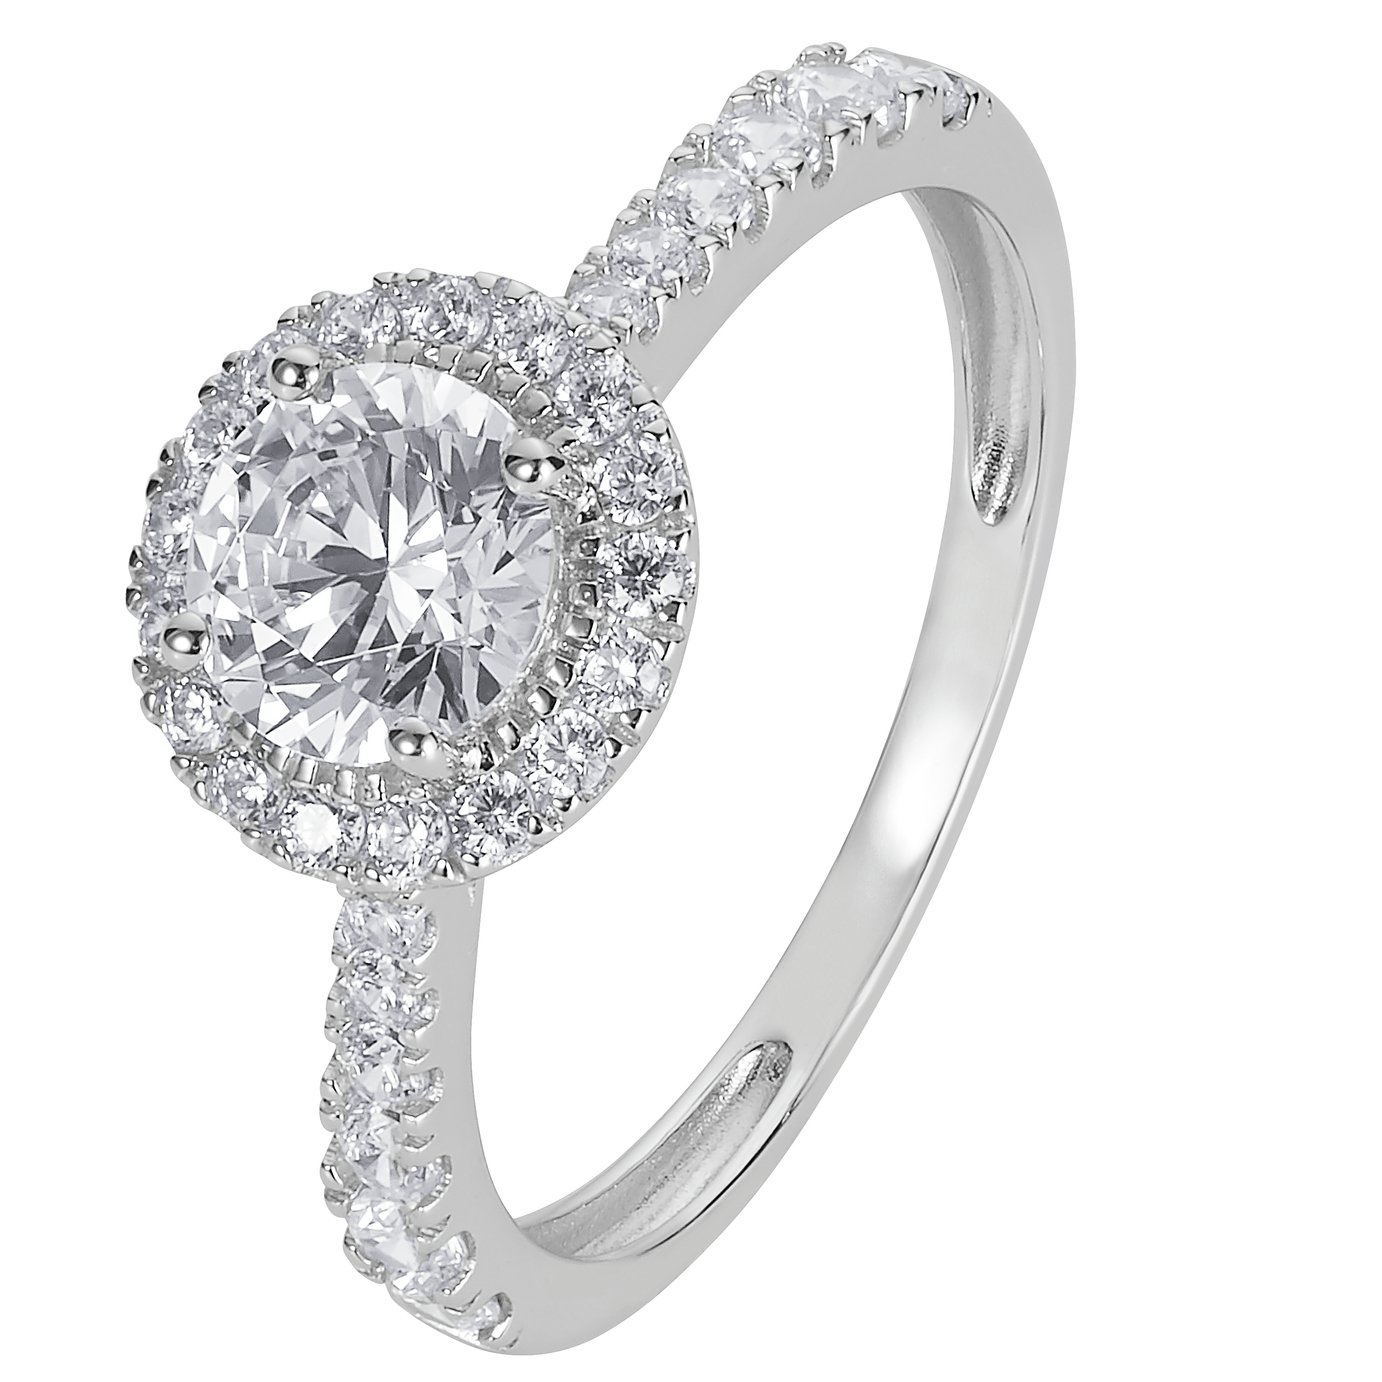 Revere 9ct White Gold Cubic Zirconia Halo Engagement Ring R